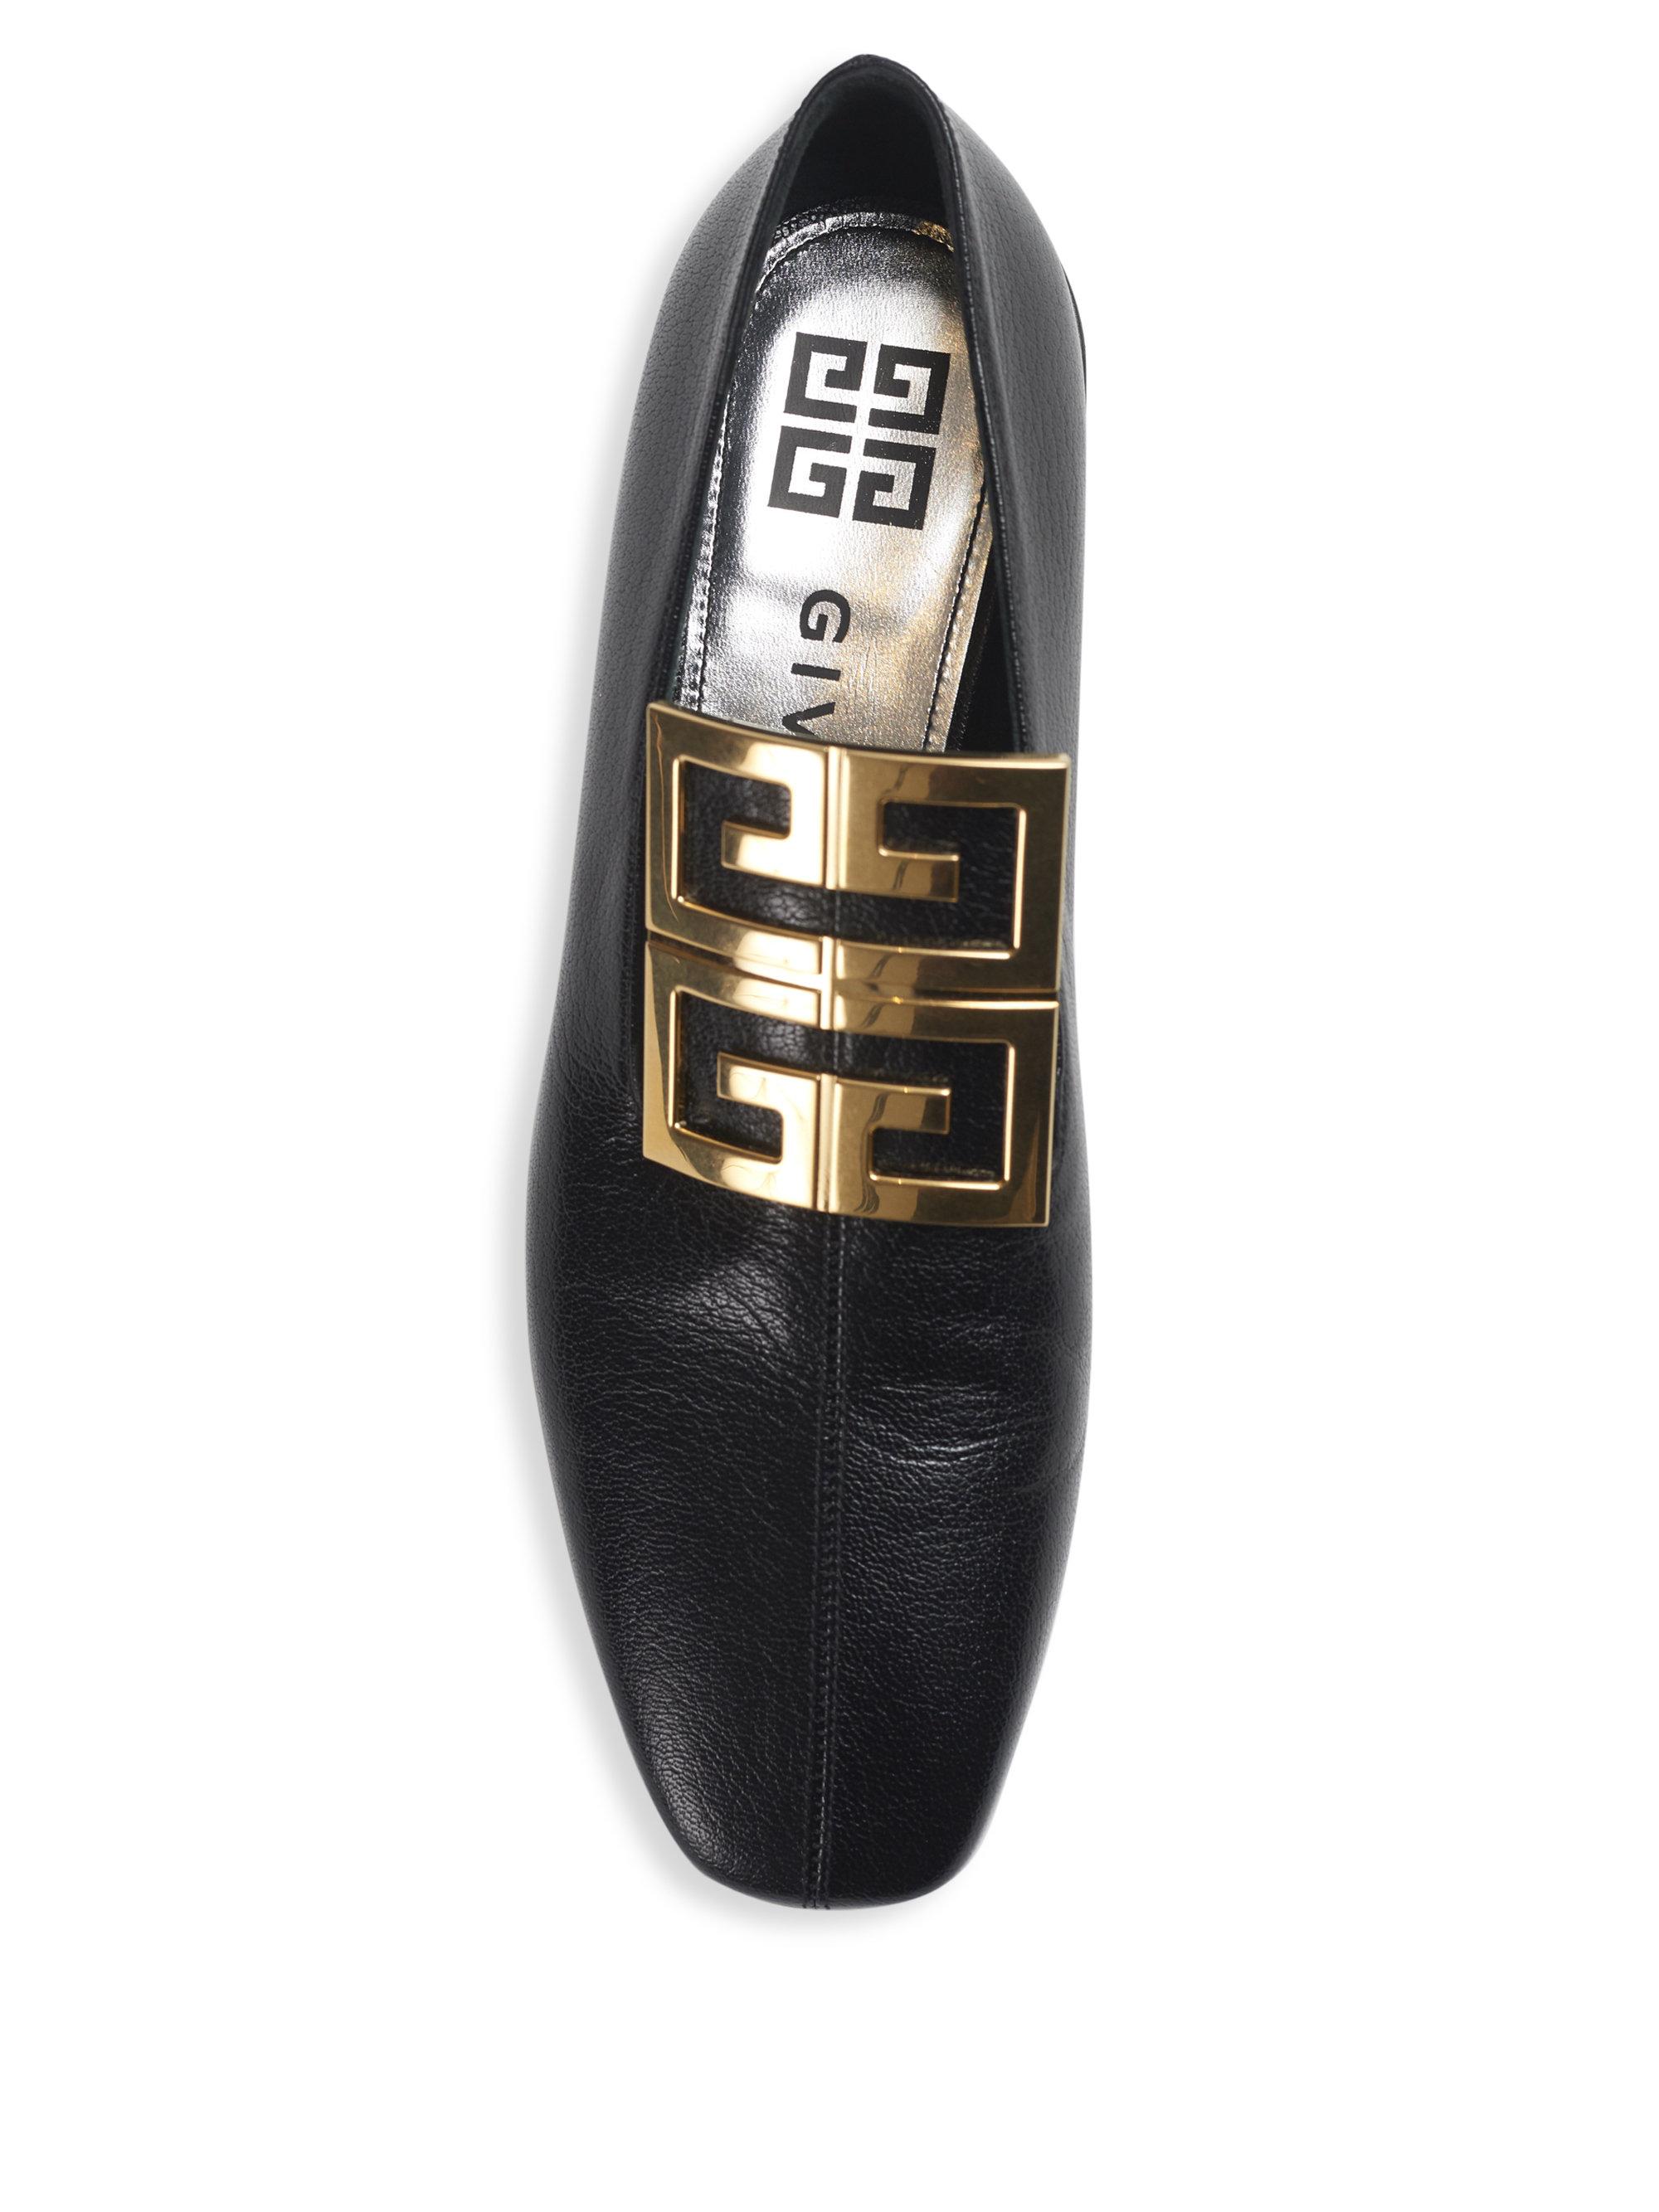 Givenchy 4g Ornament Leather Loafers in Black - Lyst